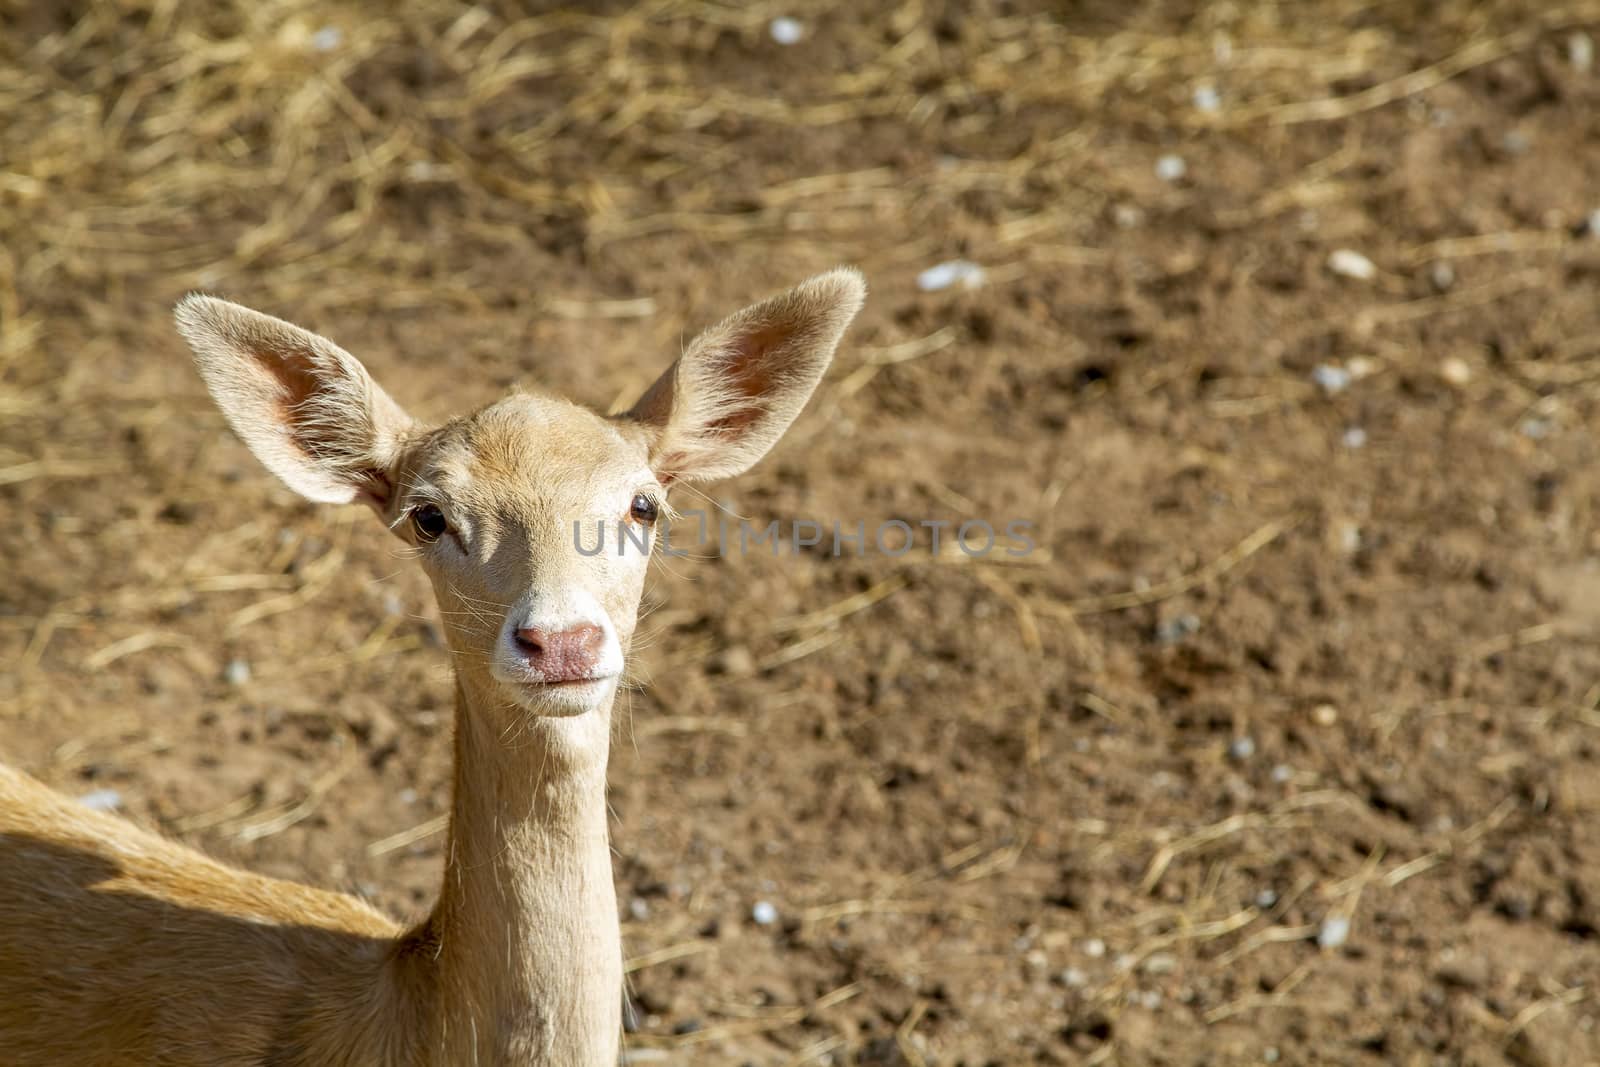 Young deer in the zoo by liewluck